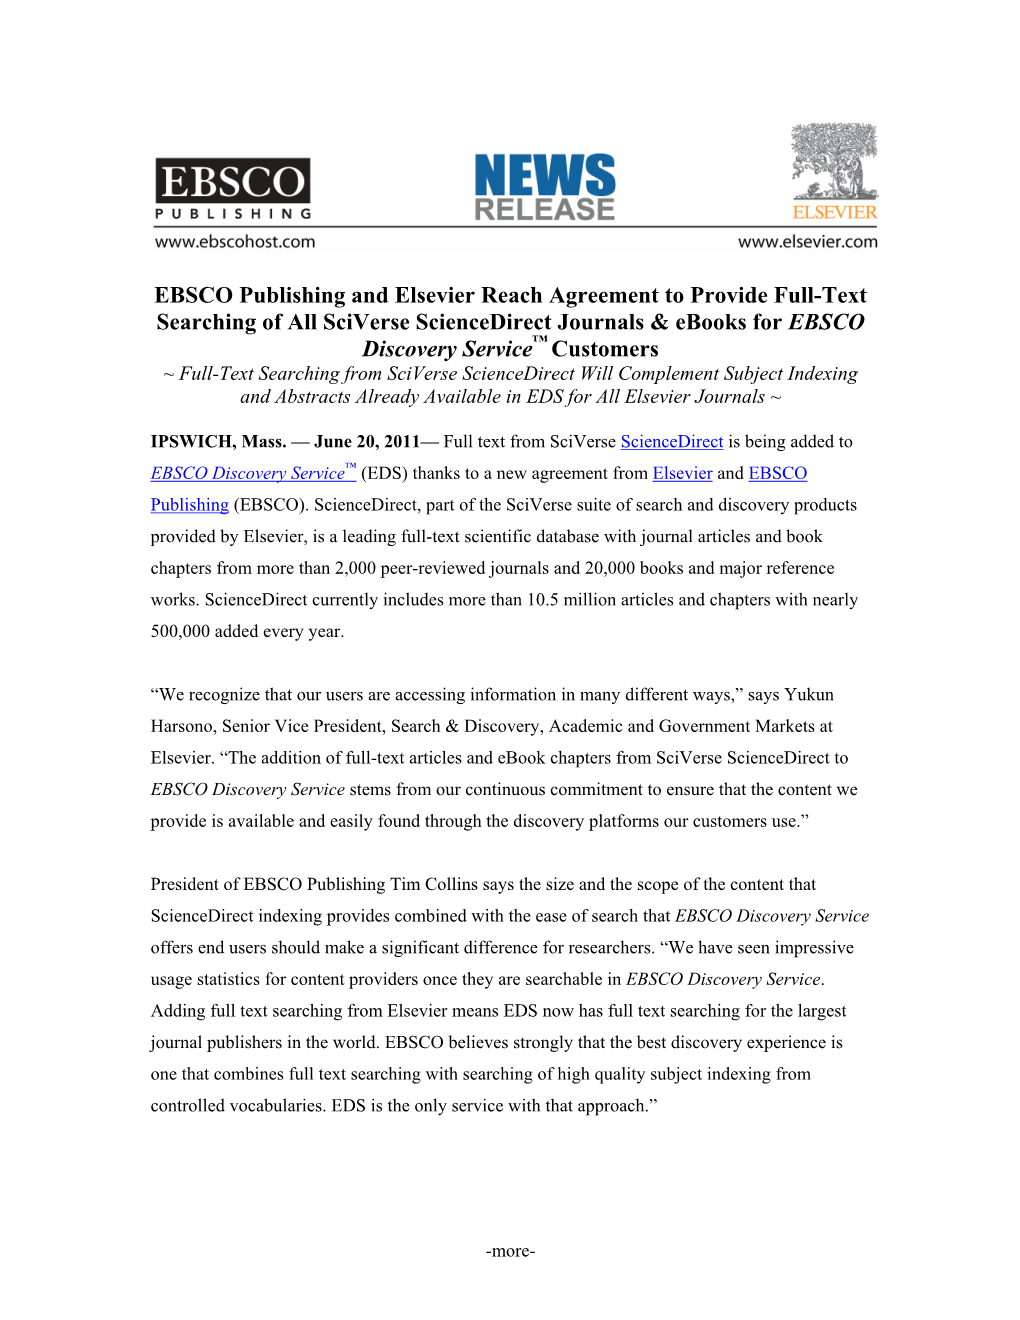 EBSCO Publishing and Elsevier Reach Agreement to Provide Full